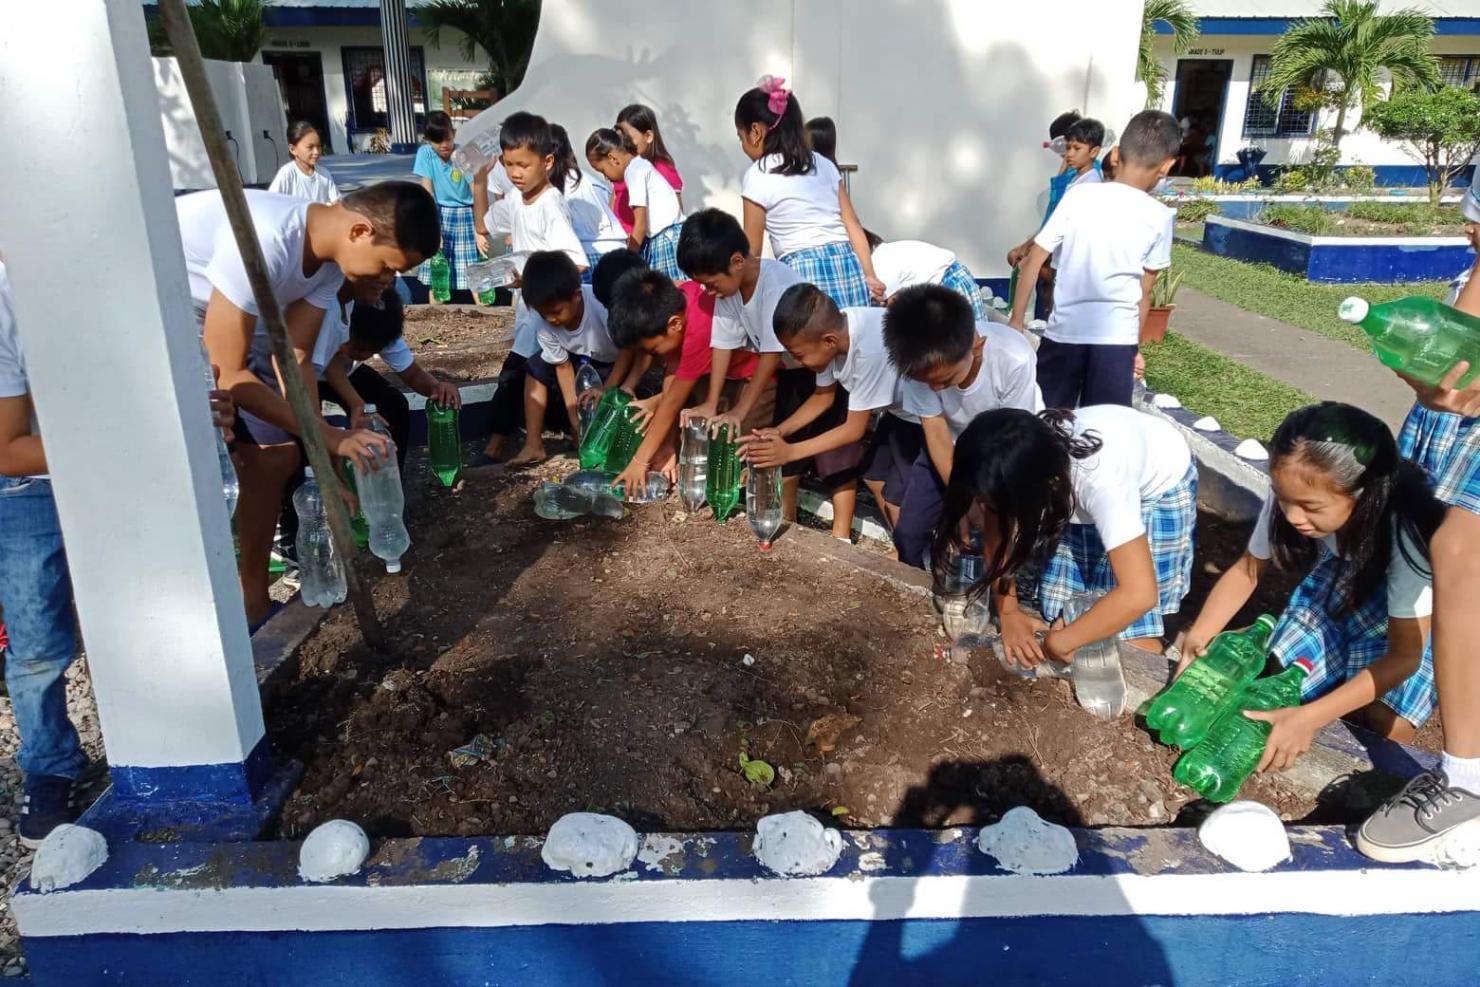 San Roque Elementary School students during creative environmental education lessons.